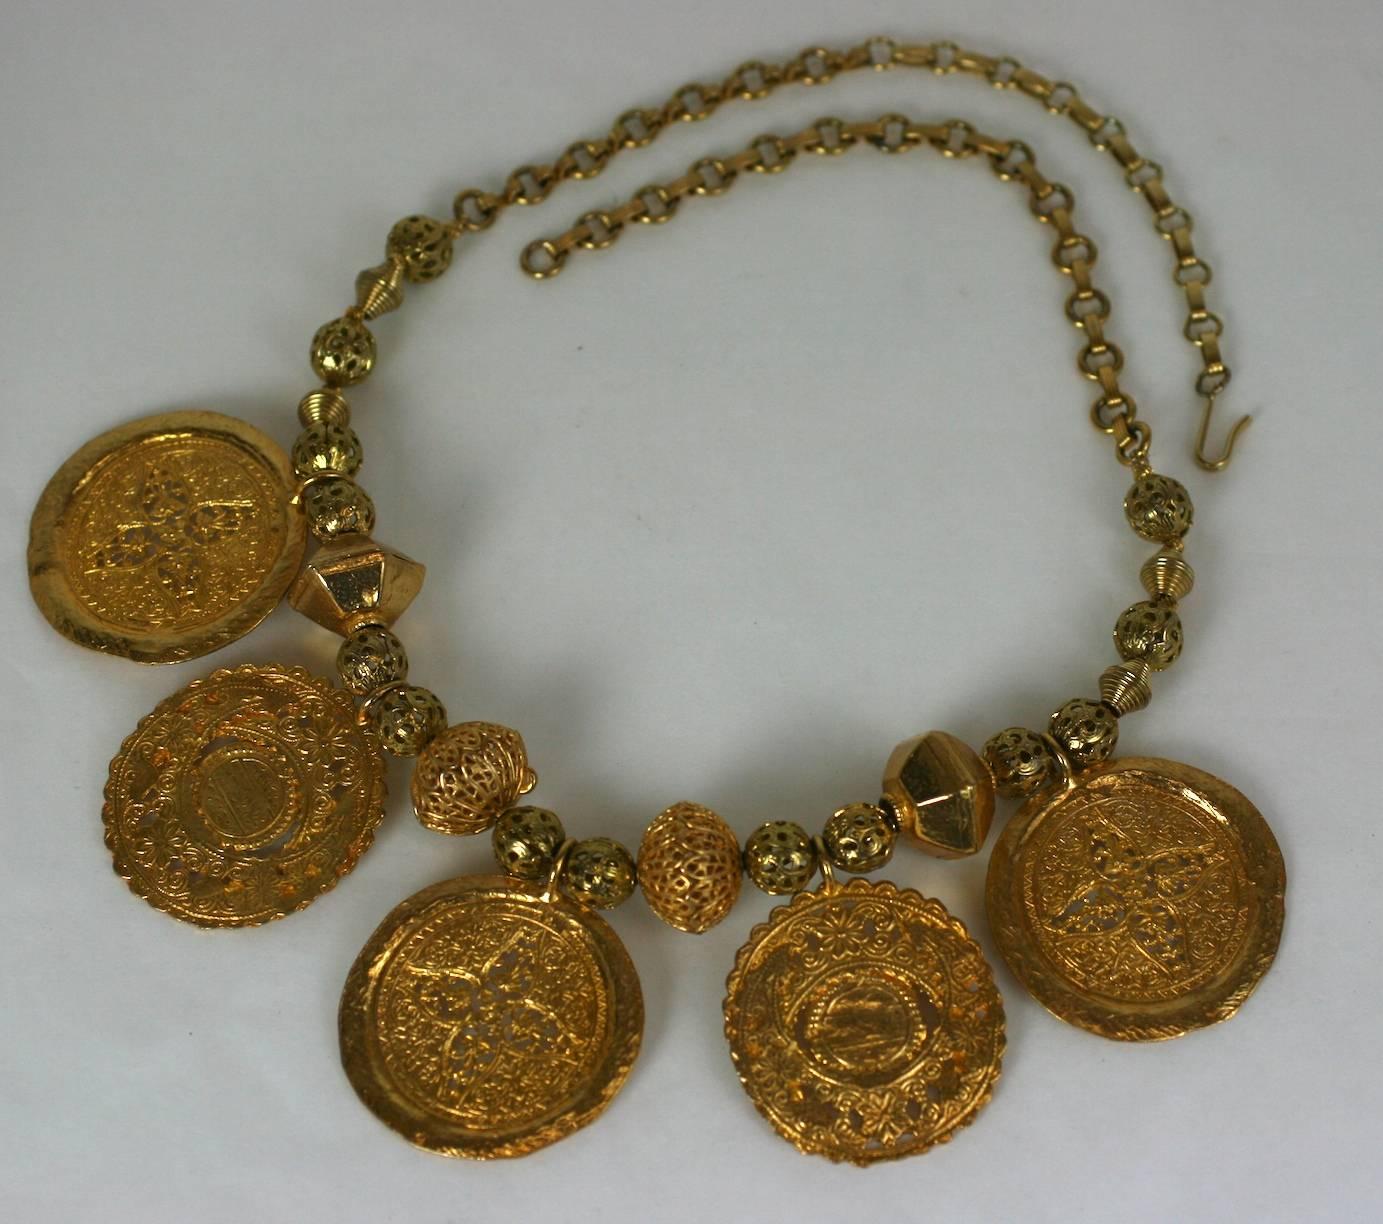 Elegant Kenneth Jay Lane Ancient Medallion Necklace in the Moroccan style with rich gold bead spacers and long adjustable chain. 1980's USA. 
25